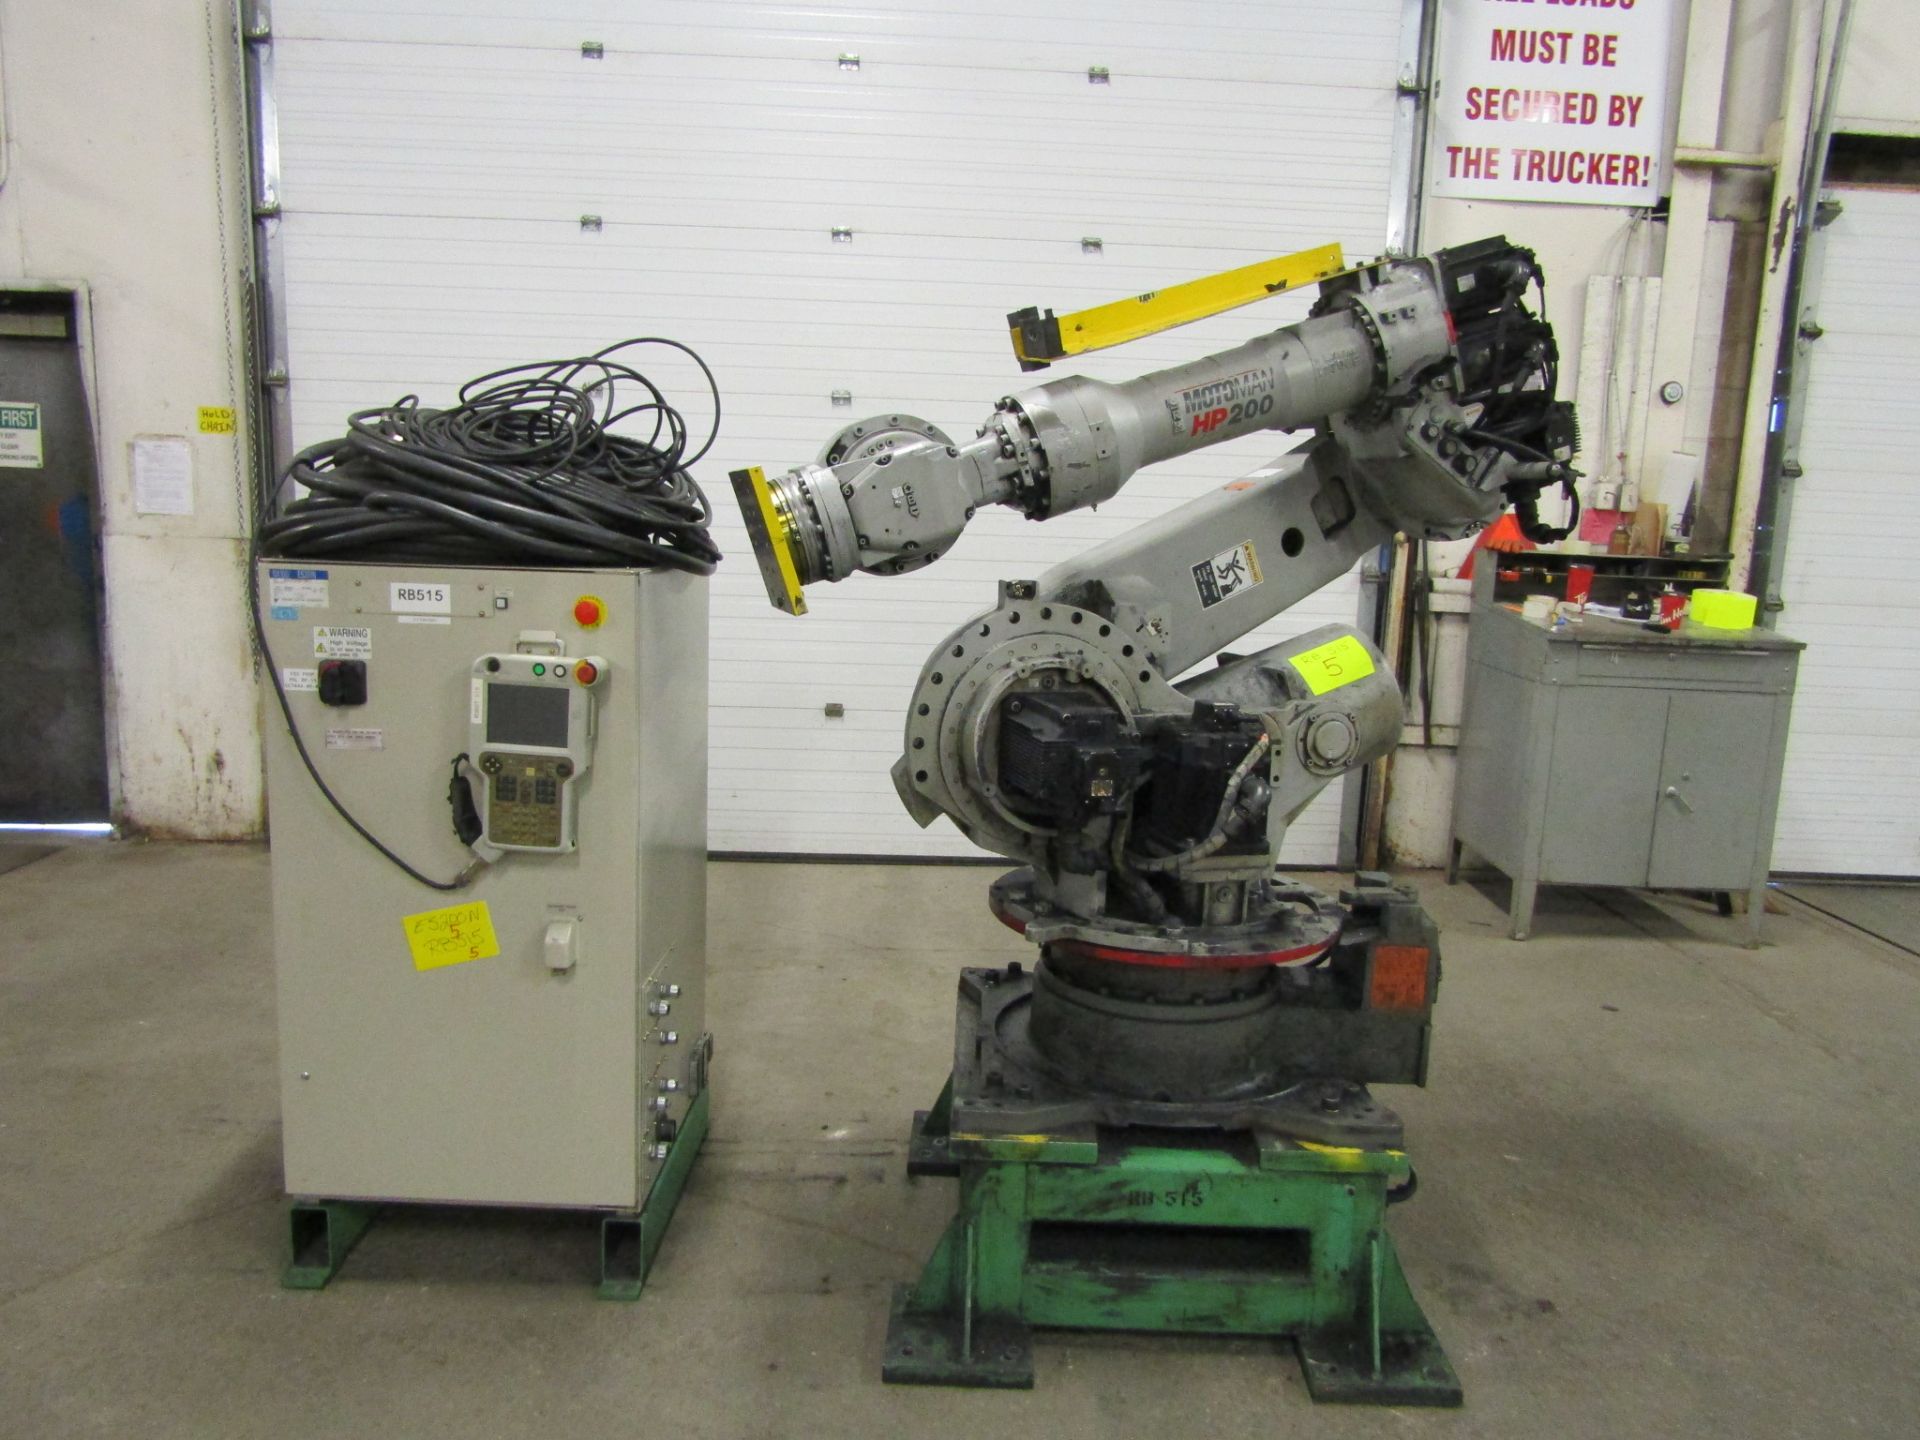 2008 Motoman HP200 Robot 200kg Capacity with Controller COMPLETE with Teach Pendant, Cables, LOW